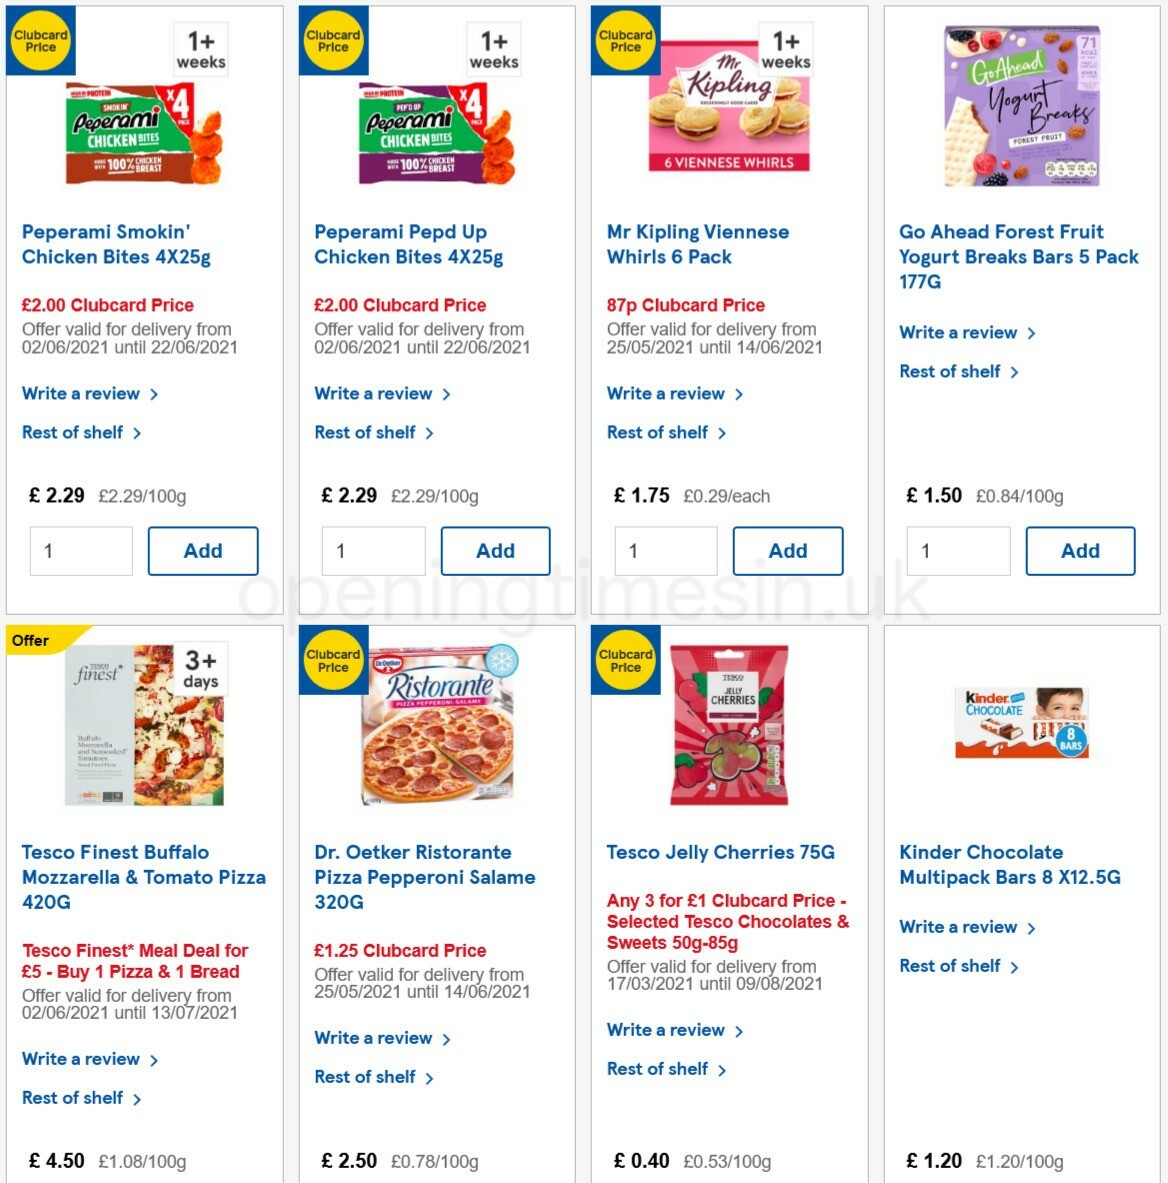 TESCO Offers from 9 June